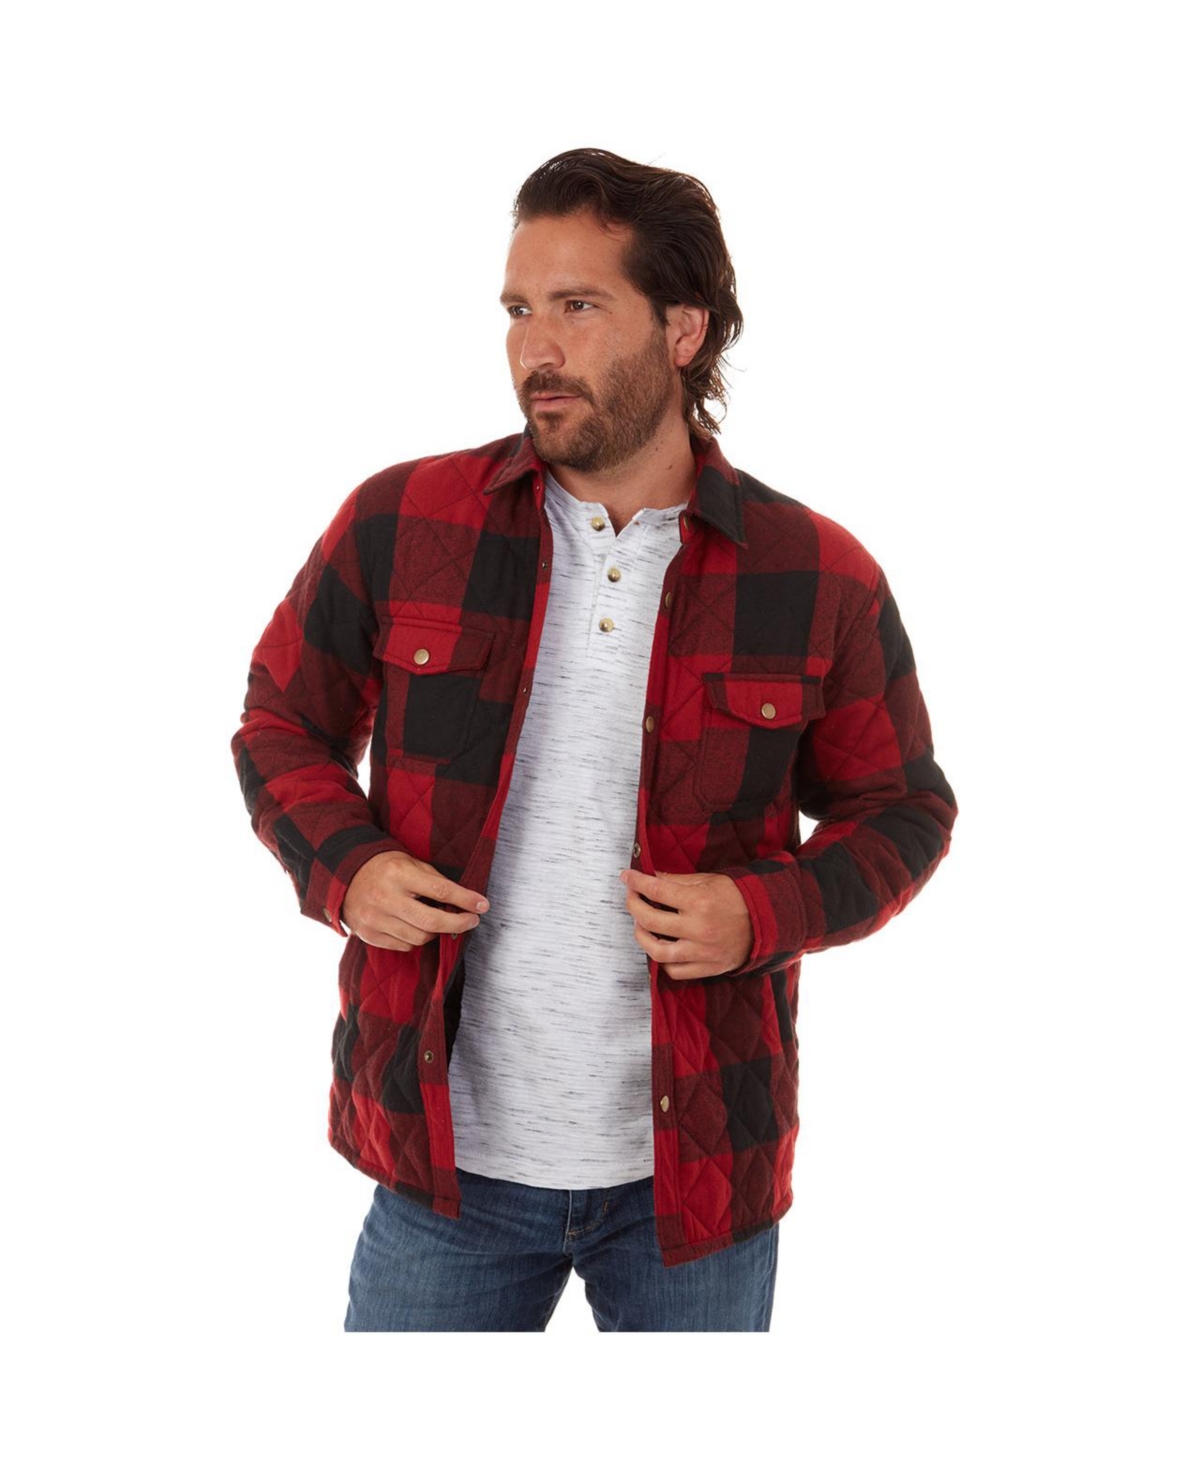 Clothing Men's Heavy Quilted Plaid Shirt Jacket - Dark red